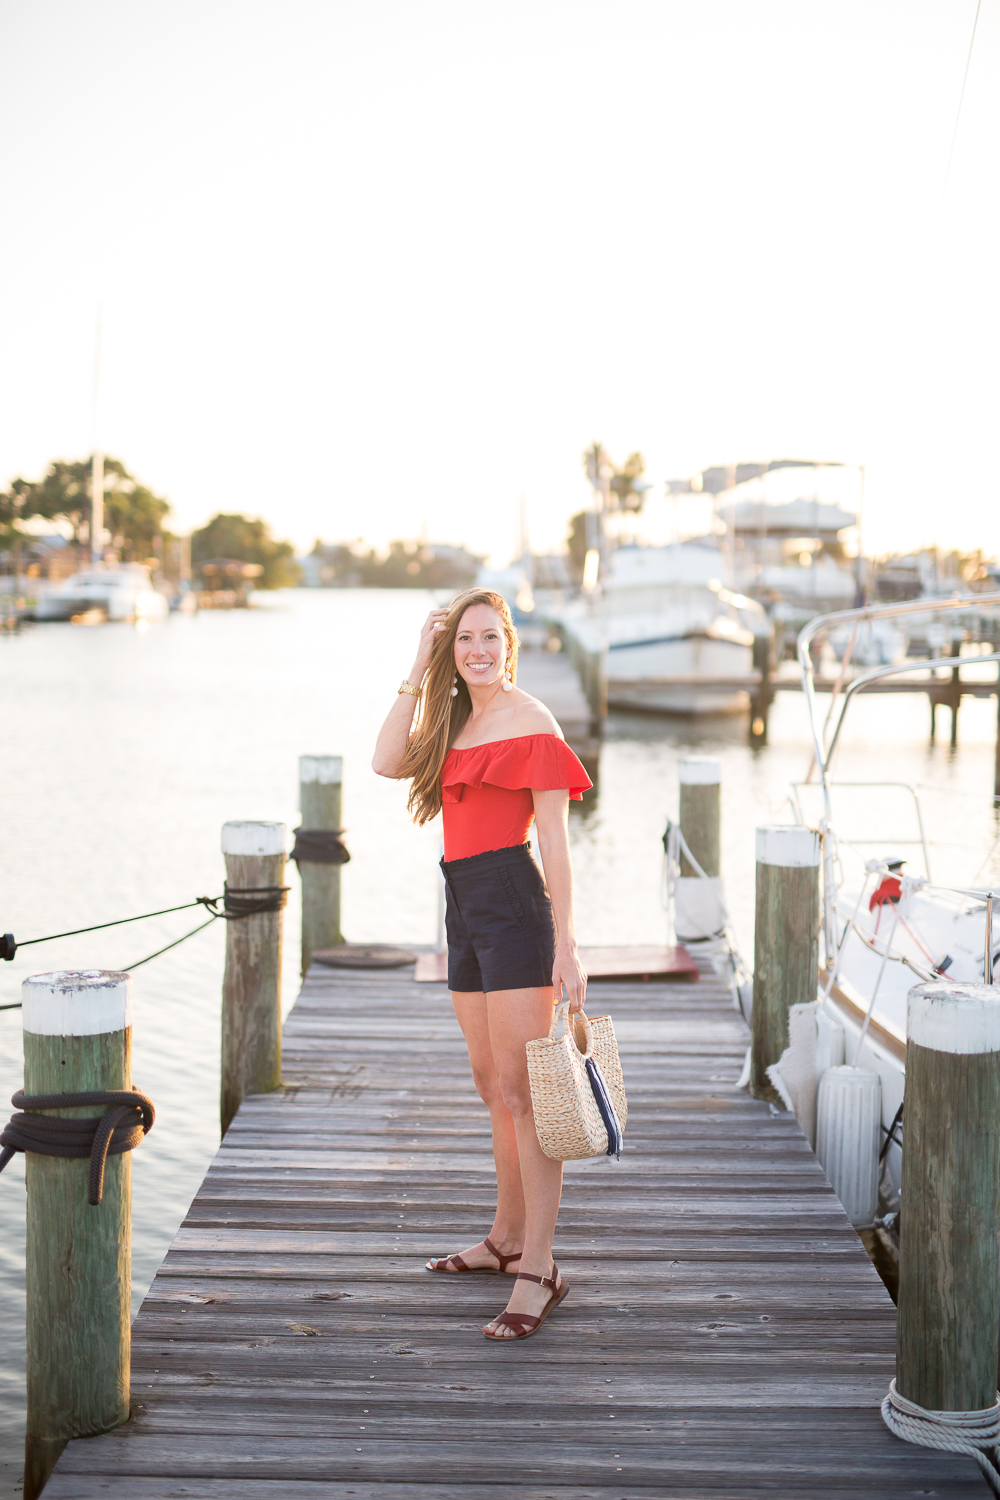 Classic 4th of July Outfit Ideas / What to Wear on 4th of July / What to wear on July 4th / All American Outfit Ideas / Summer Outfit Inspiration / Preppy Summer Outfit / Preppy Style Inspiration - Sunshine Style, A Florida Based Fashion and Lifestyle Blog